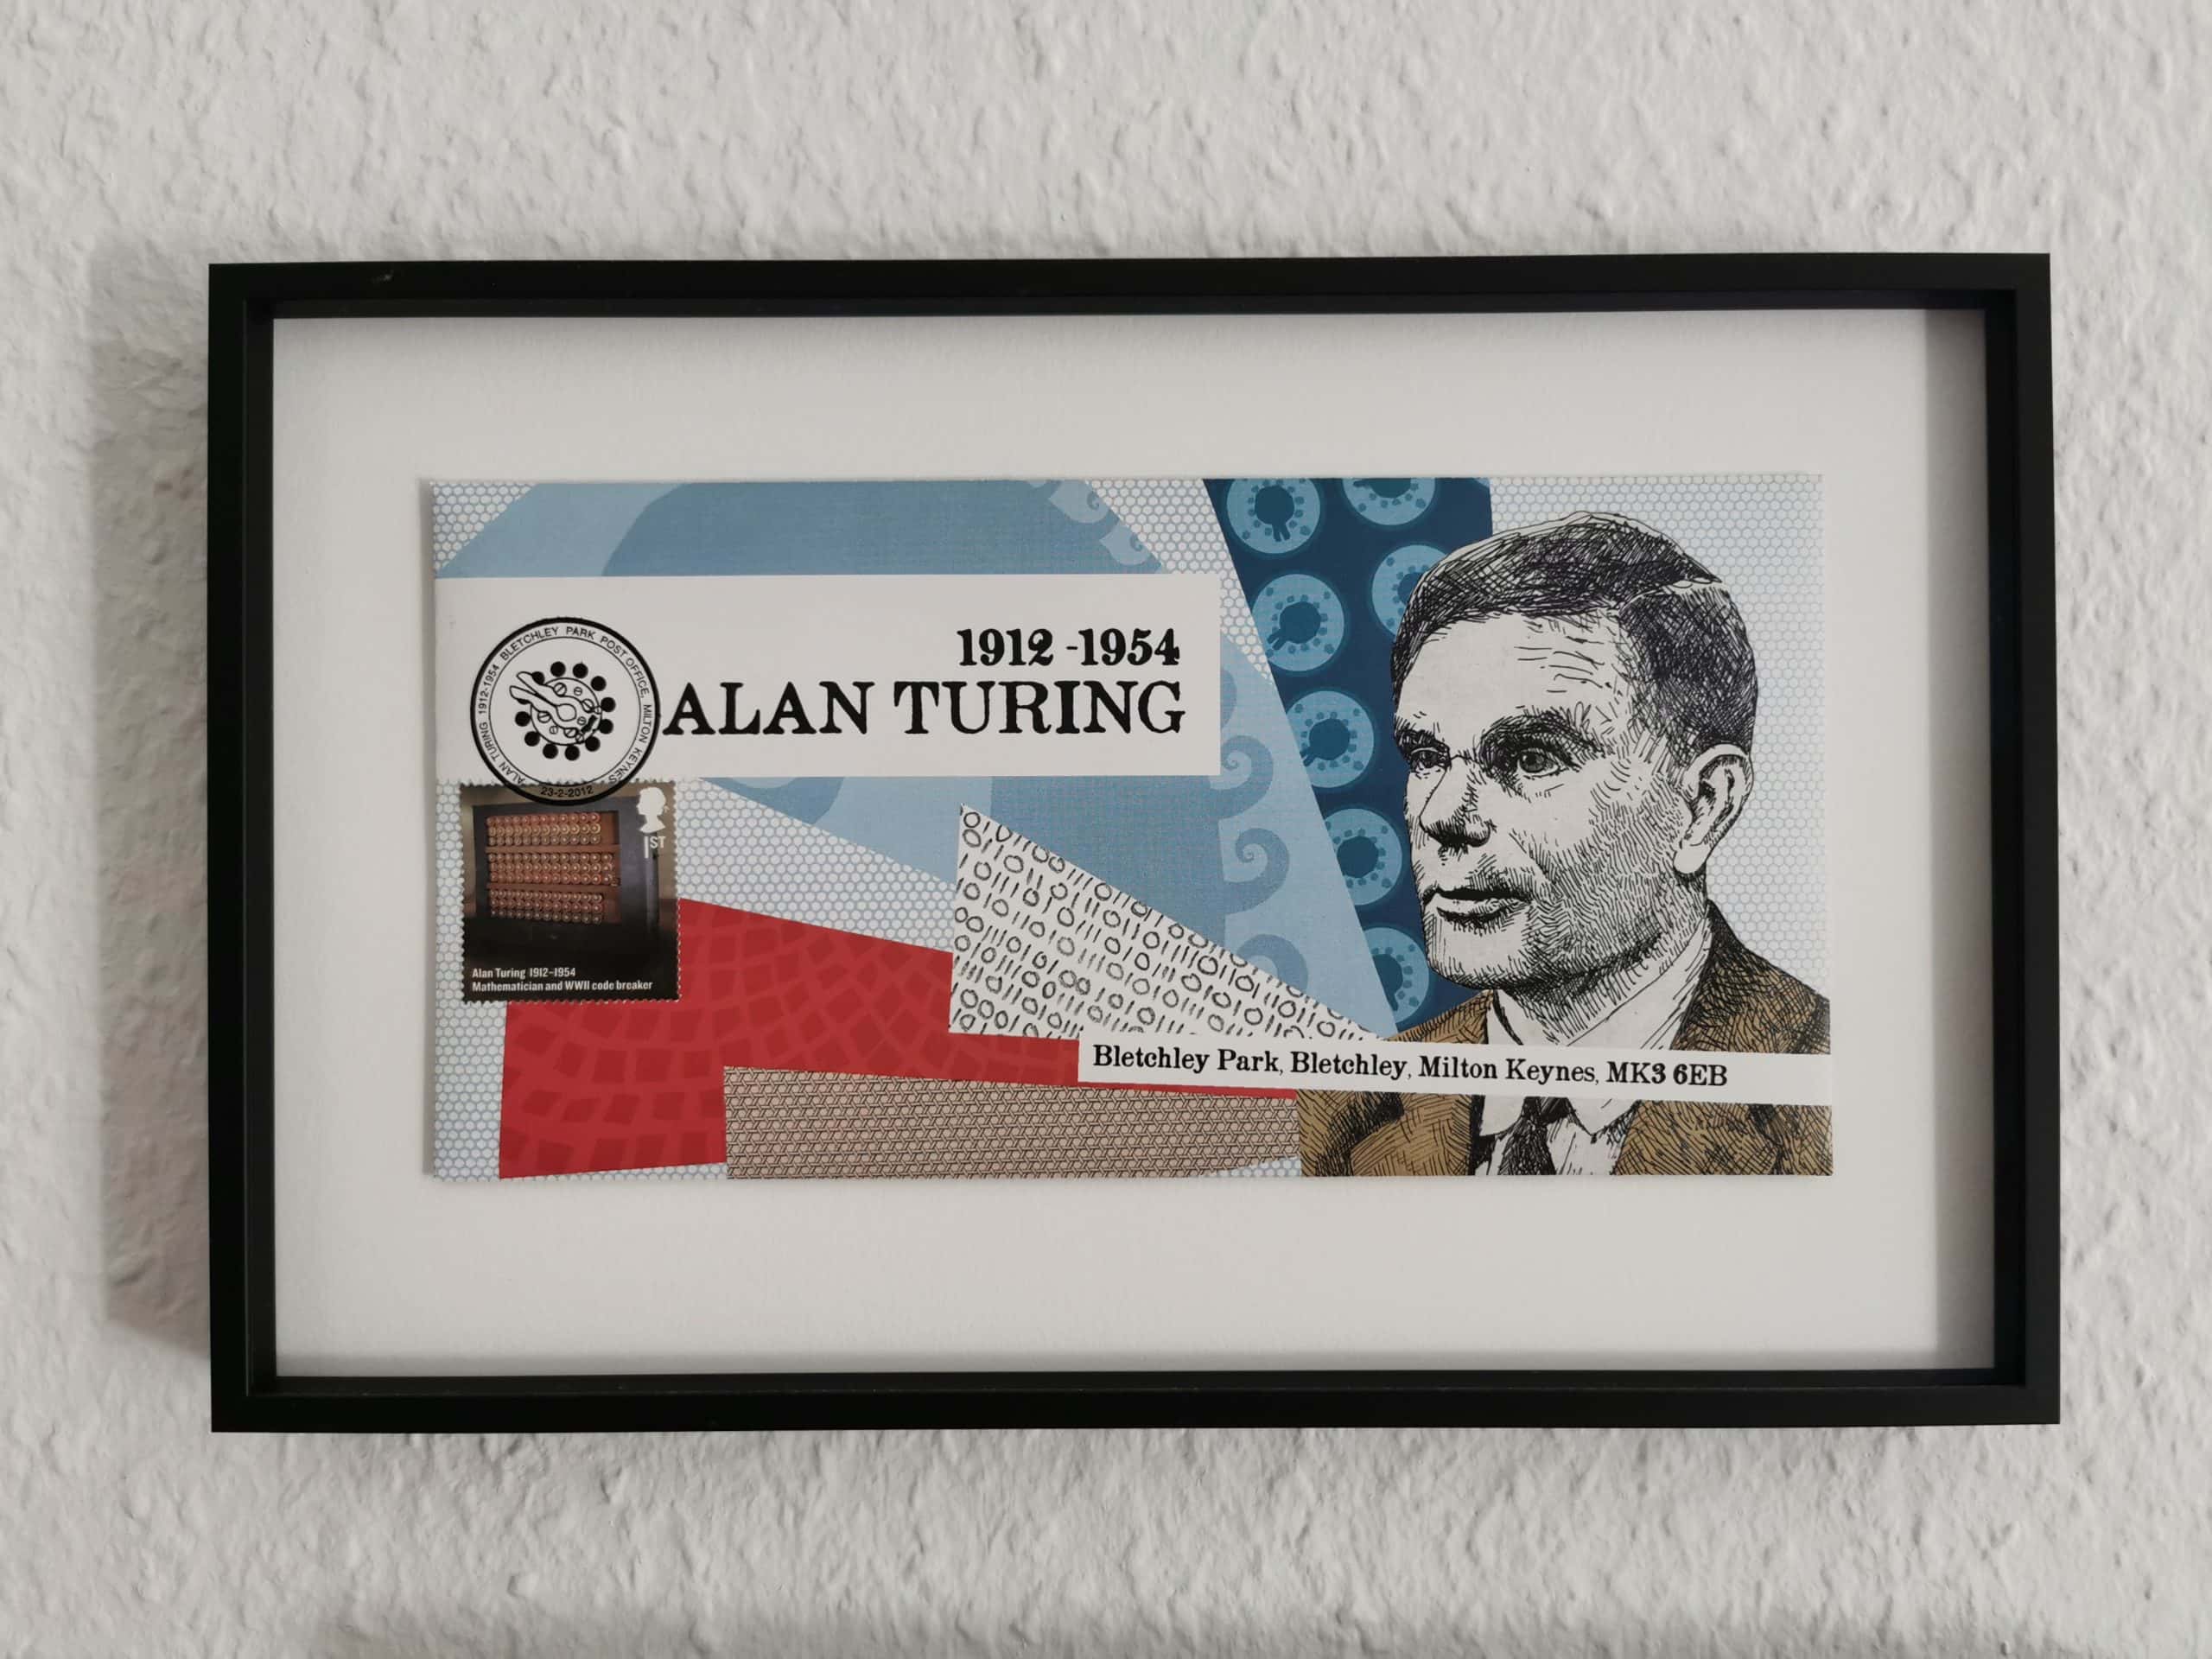 Alan Turing: Mathematician, computer pioneer and wartime code breaker -  Discovery Place Science Museum